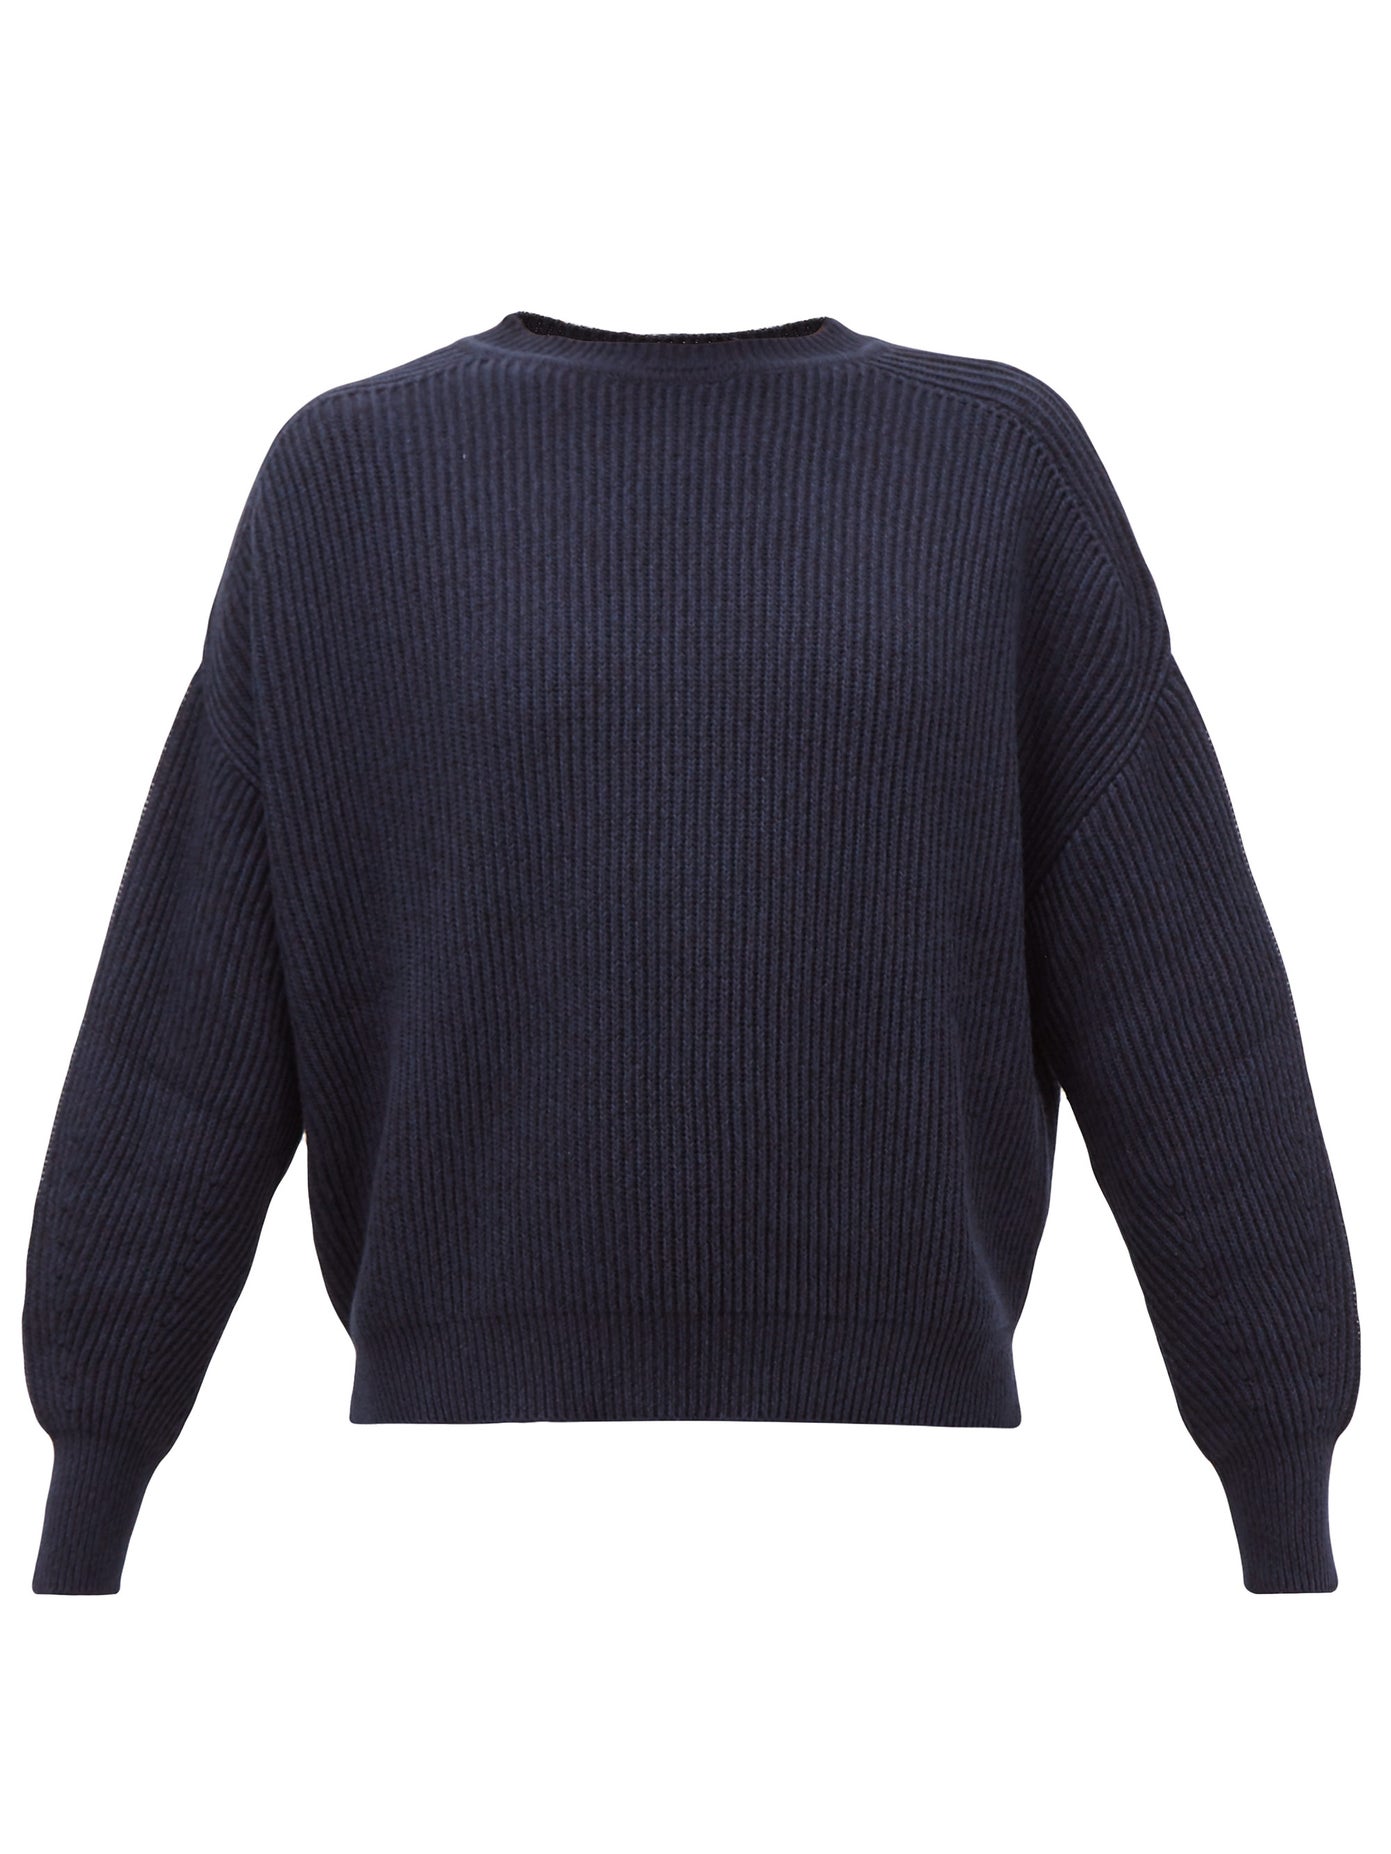 Max Mara Leisure - Elisir Sweater | ABOUT ICONS